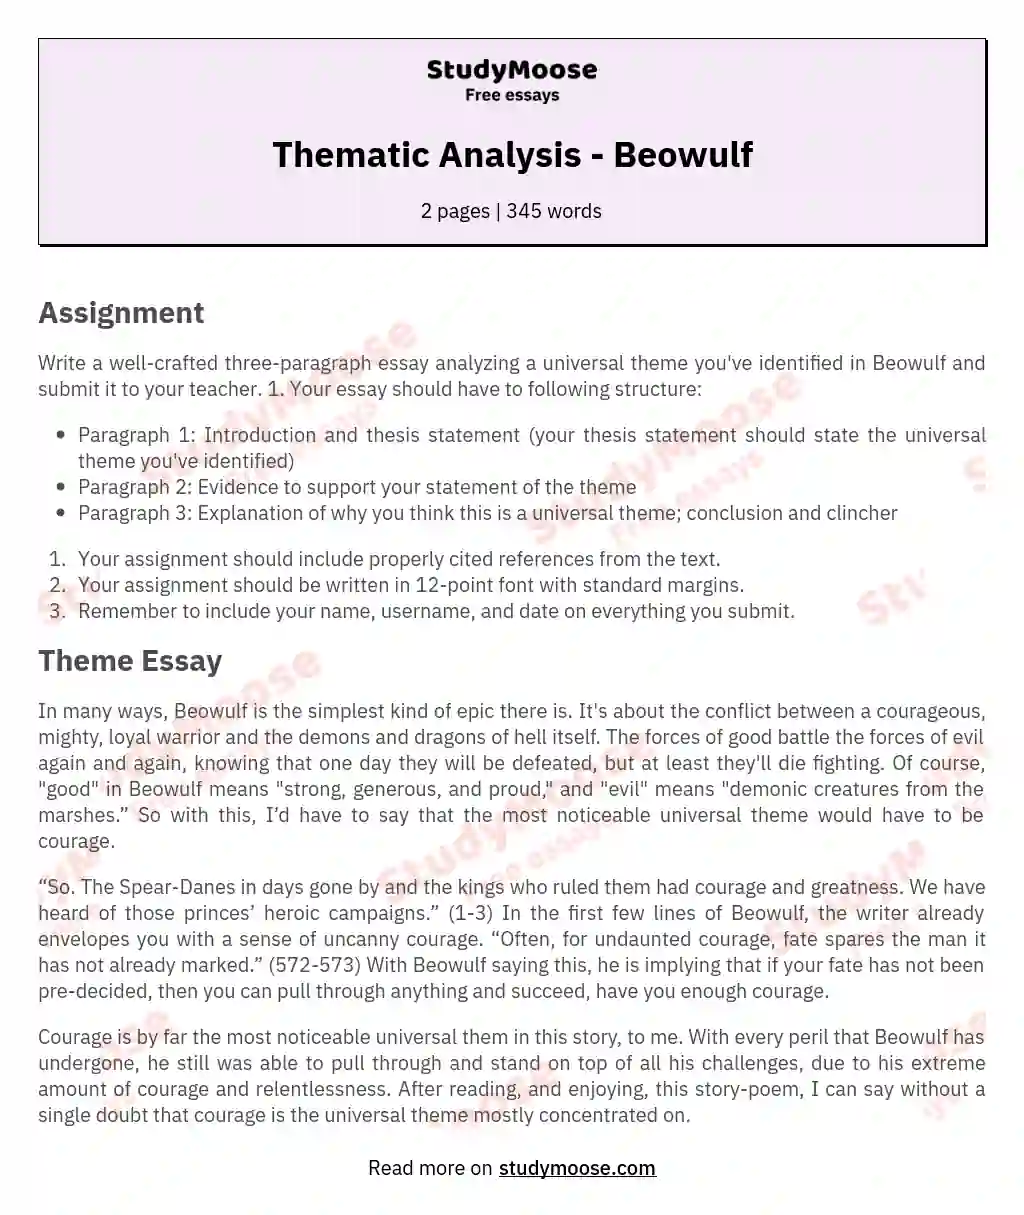 thematic analysis essay prompt